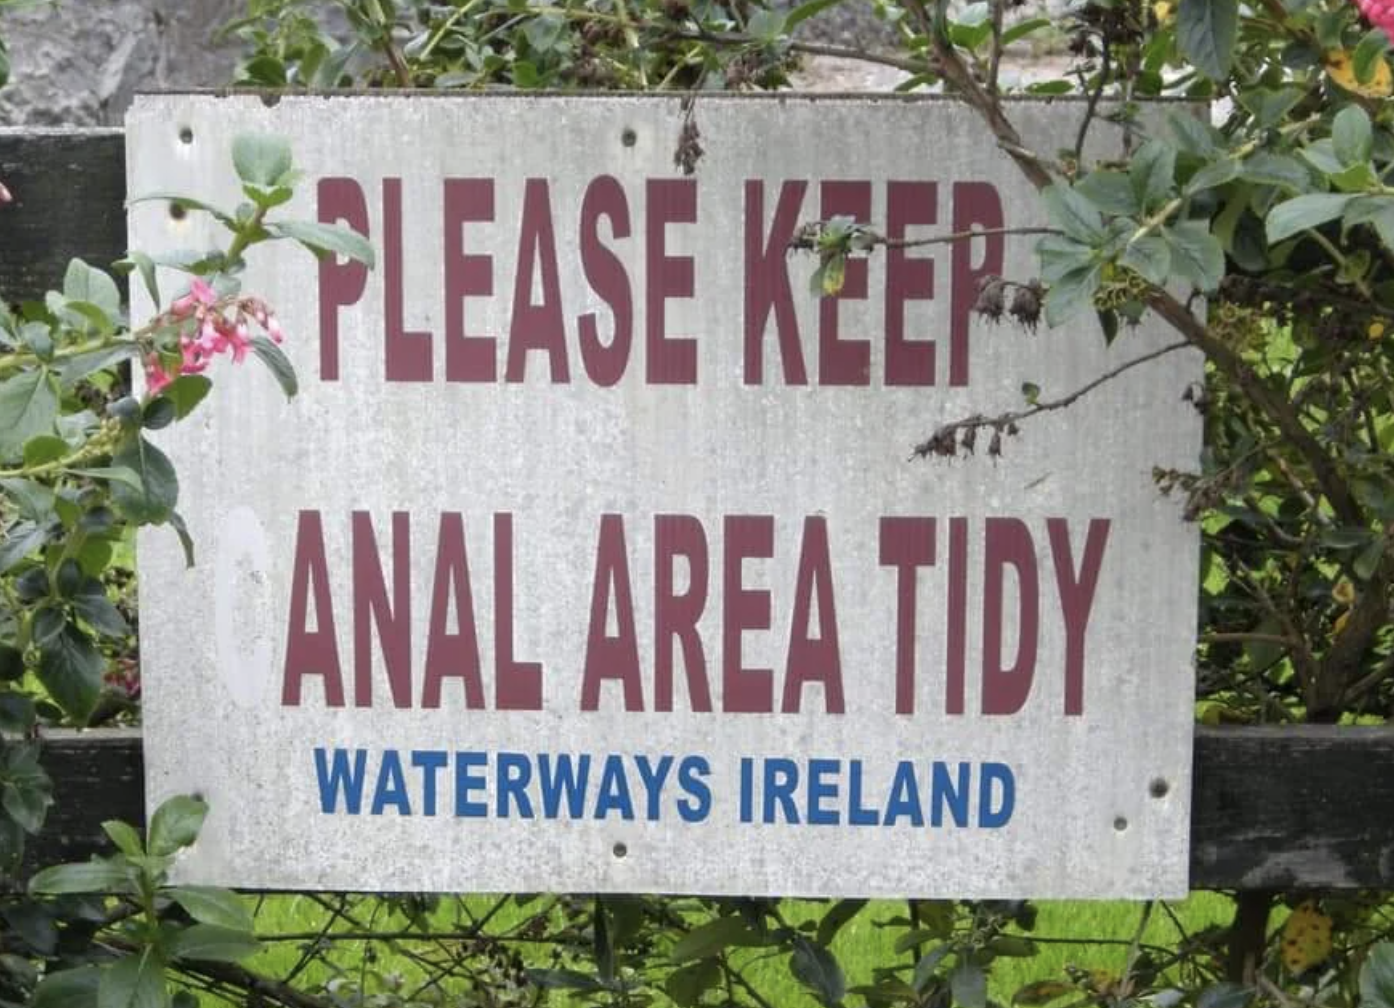 Sign with a &quot;c&quot; missing: &quot;Please keep anal area tidy — Waterways Ireland&quot;